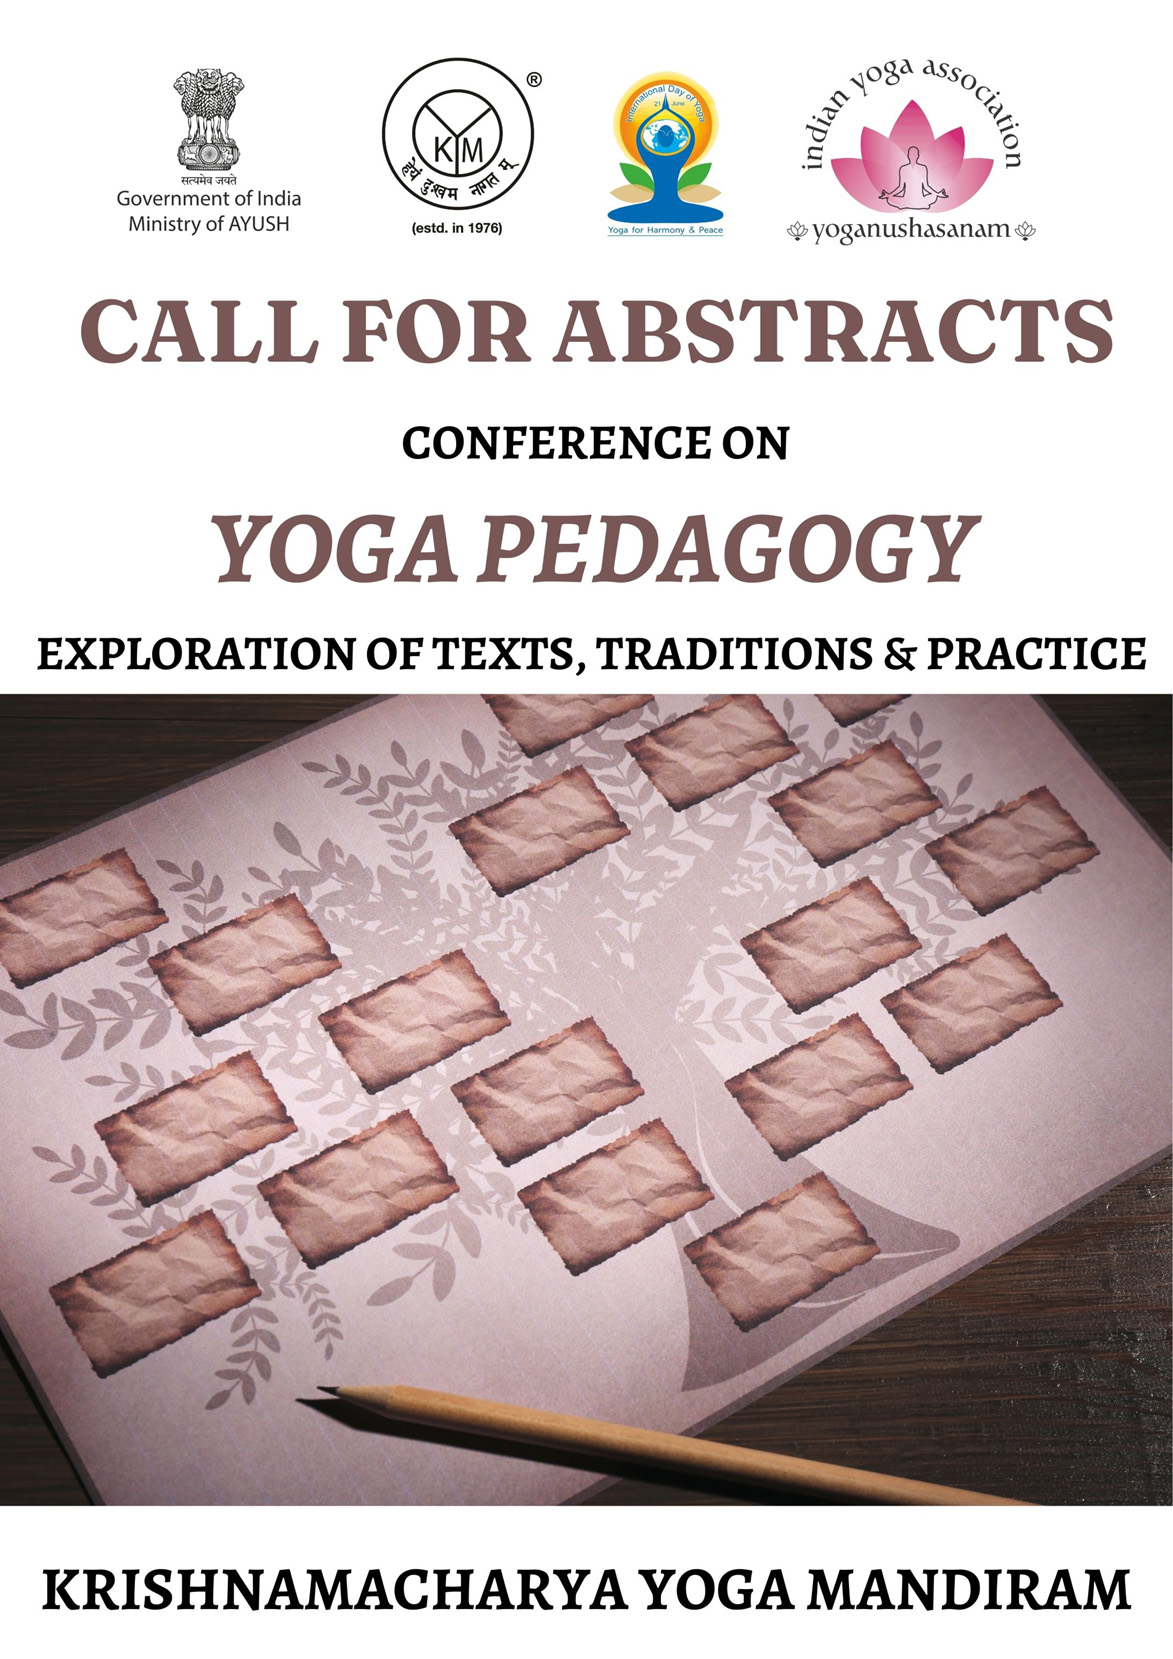 Call for Abstracts For Conference on Yoga Pedagogy | Exploration of Texts, Traditions and Practice